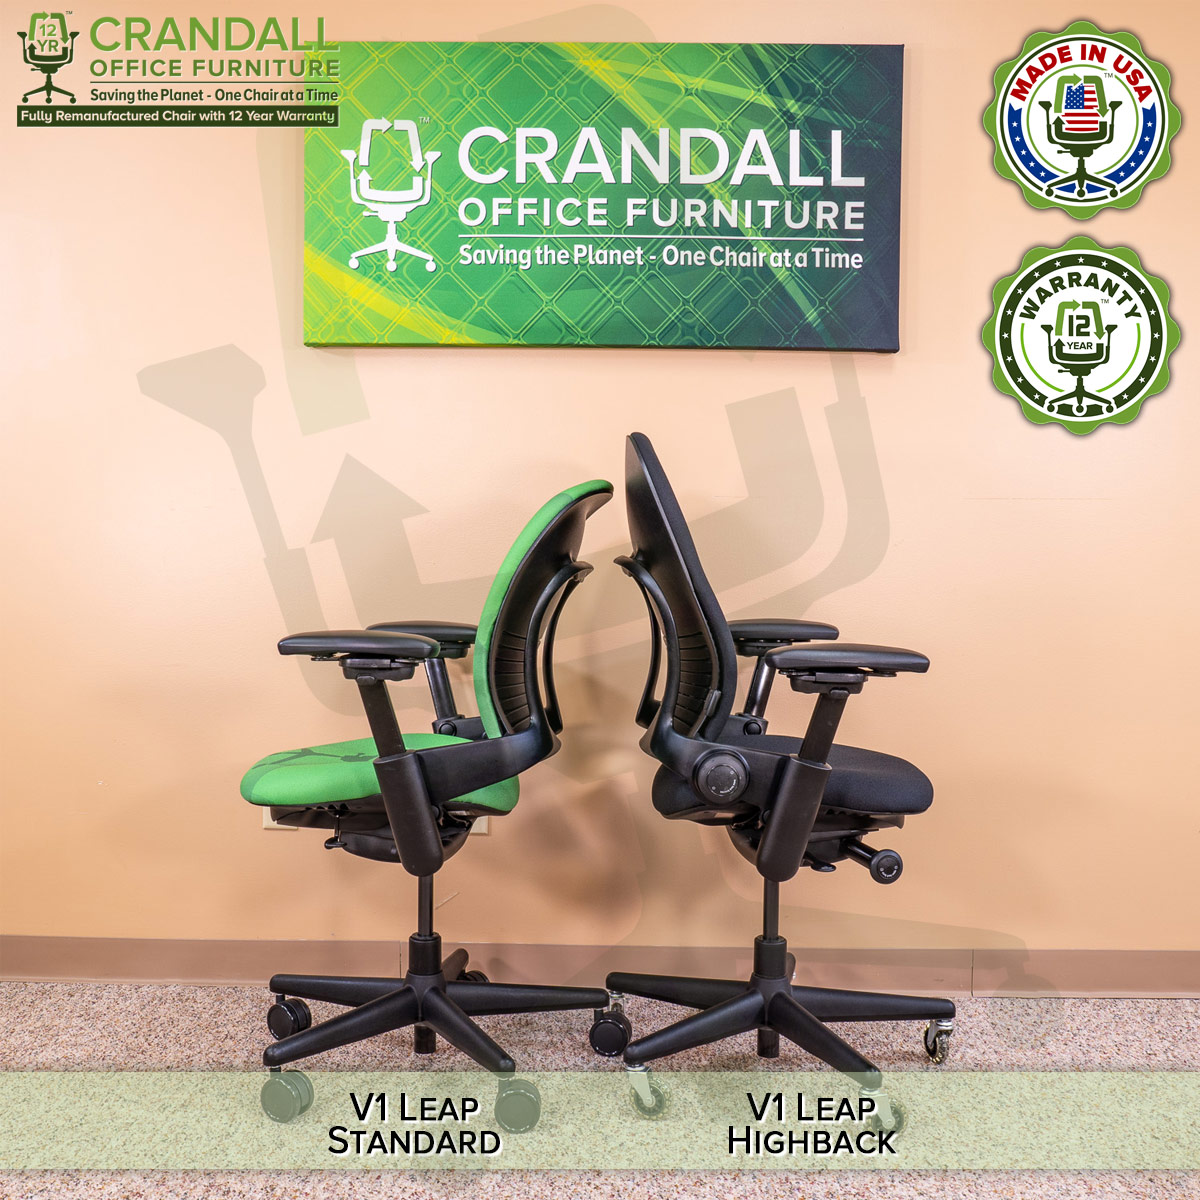 Crandall Office Furniture Remanufactured Steelcase V1 Leap Chair - Highback 011